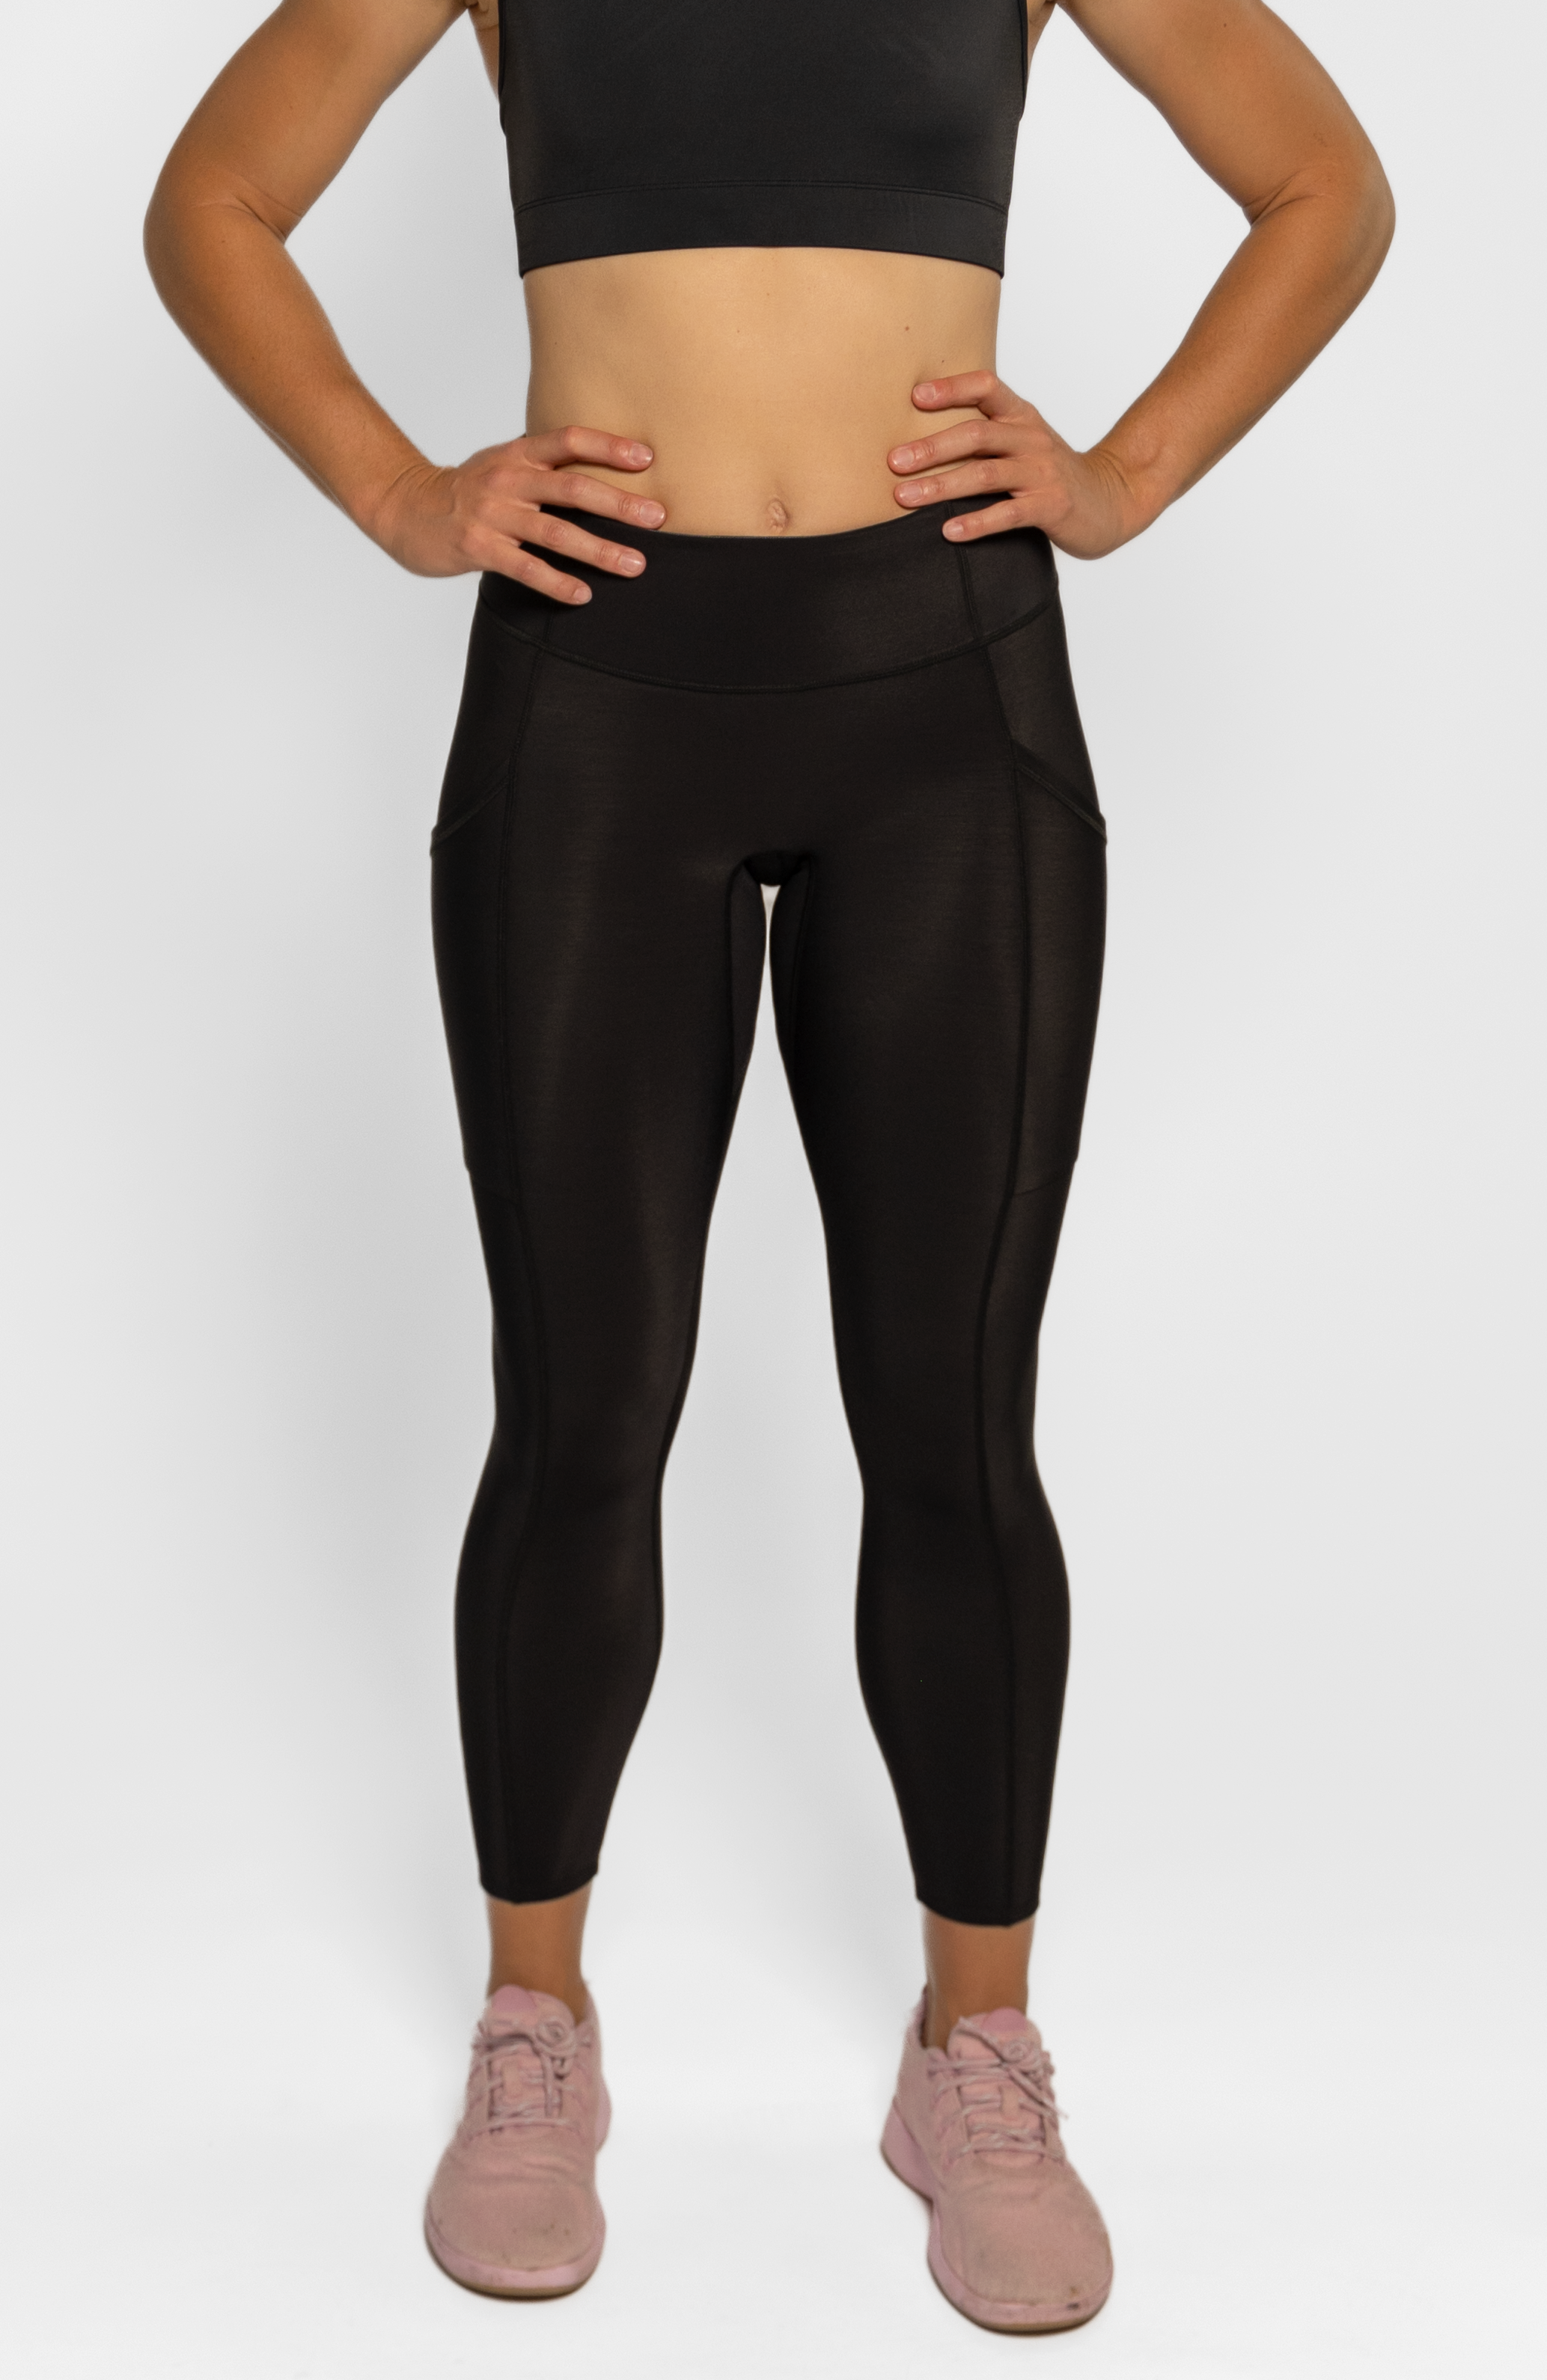 RNS FITNESS Solid Women Black Tights - Buy RNS FITNESS Solid Women